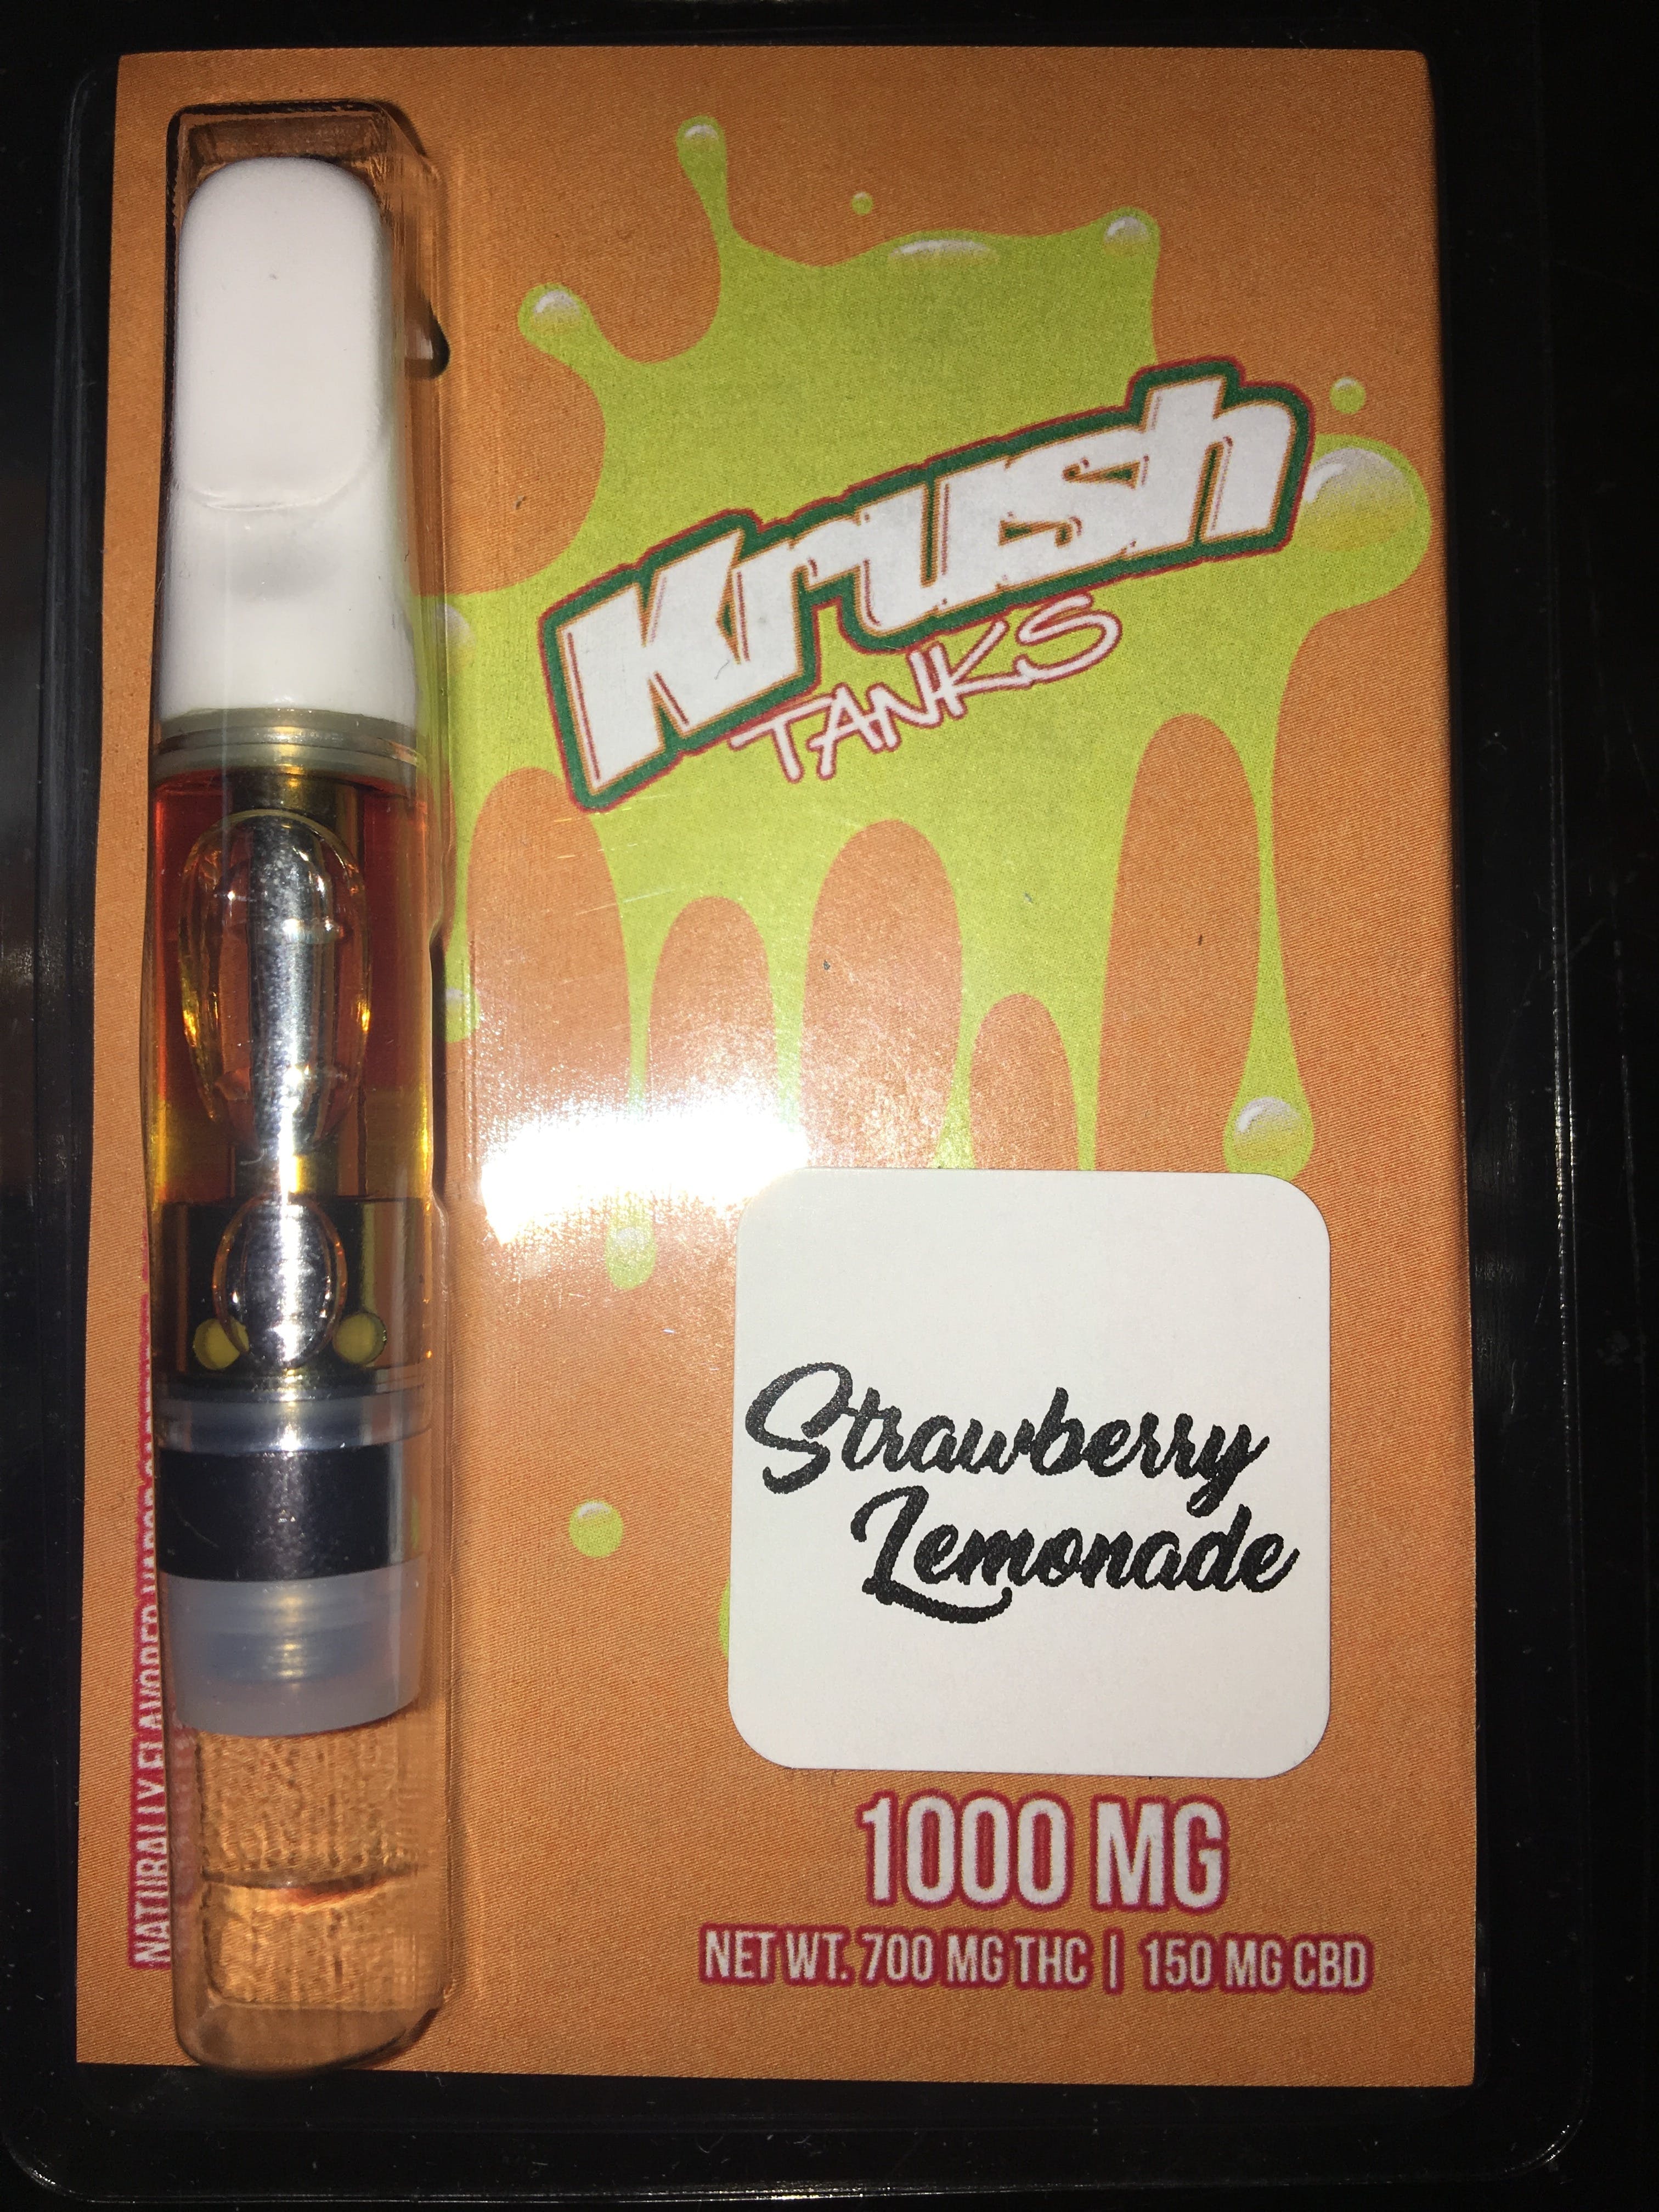 concentrate-krush-cans-strawberry-limonade-1g-vape-cartridge-21-21-21